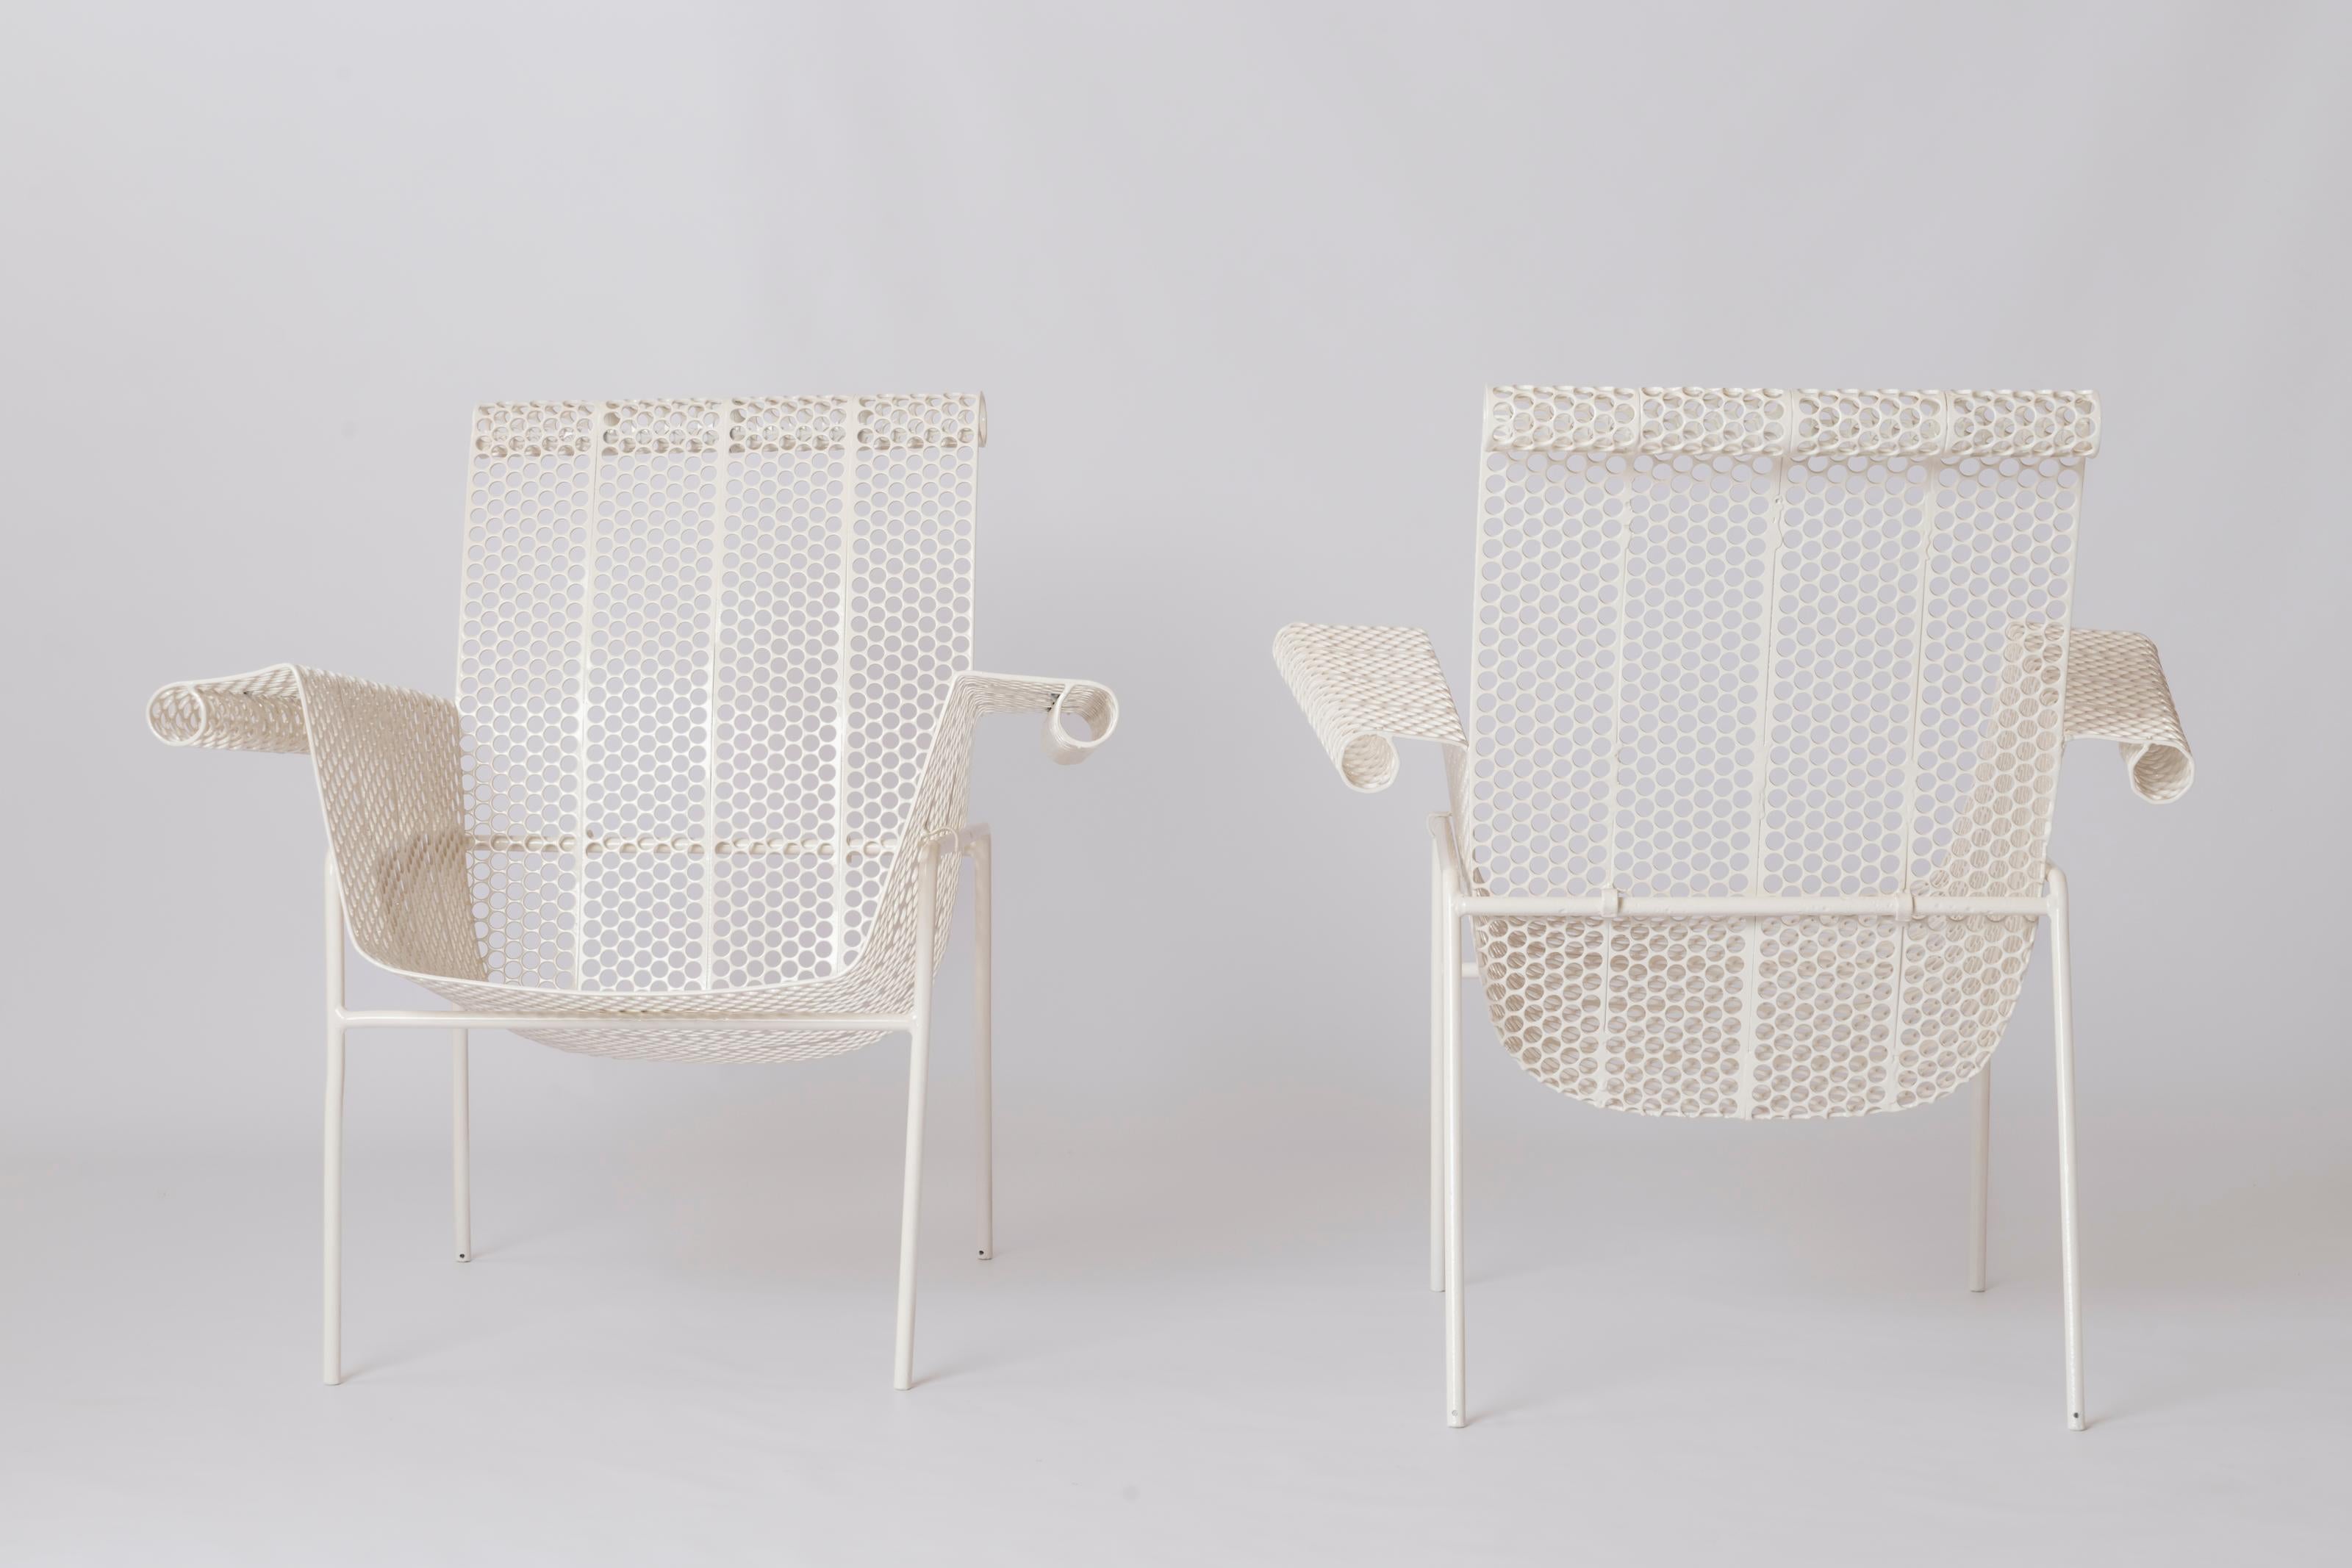 Very rare pair of René Malaval armchairs for the Biarritz Casino. France 1950's. 
These chairs are made of a welded steel base on which the perforated rigitulle structure sits. That structure is made of a backrest and an elegant wavy seat with